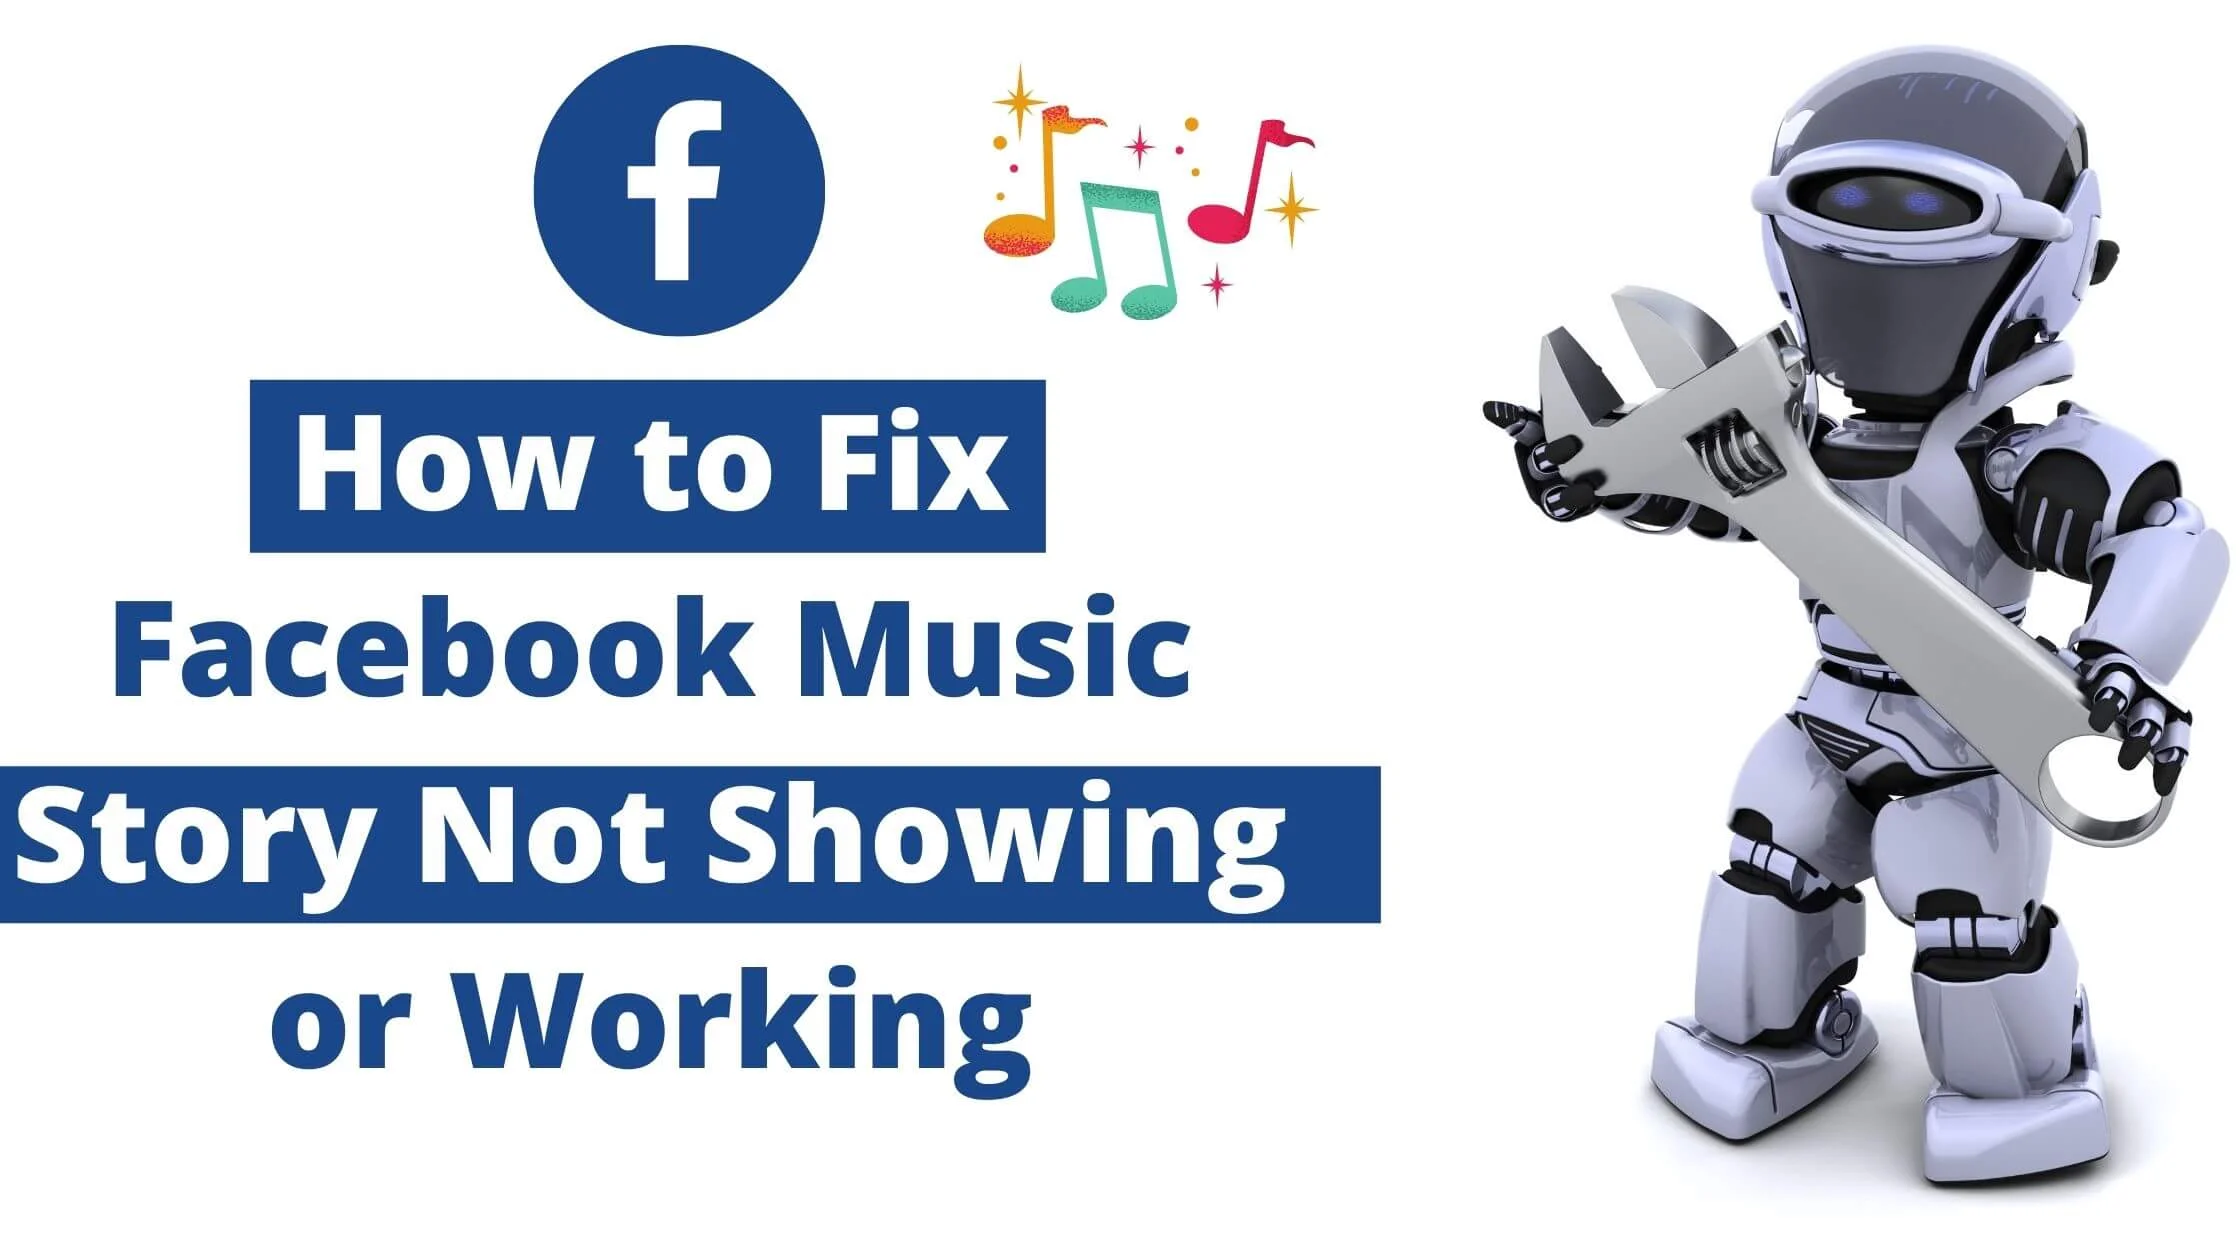 How to Fix Facebook Music Story Not Showing or Working